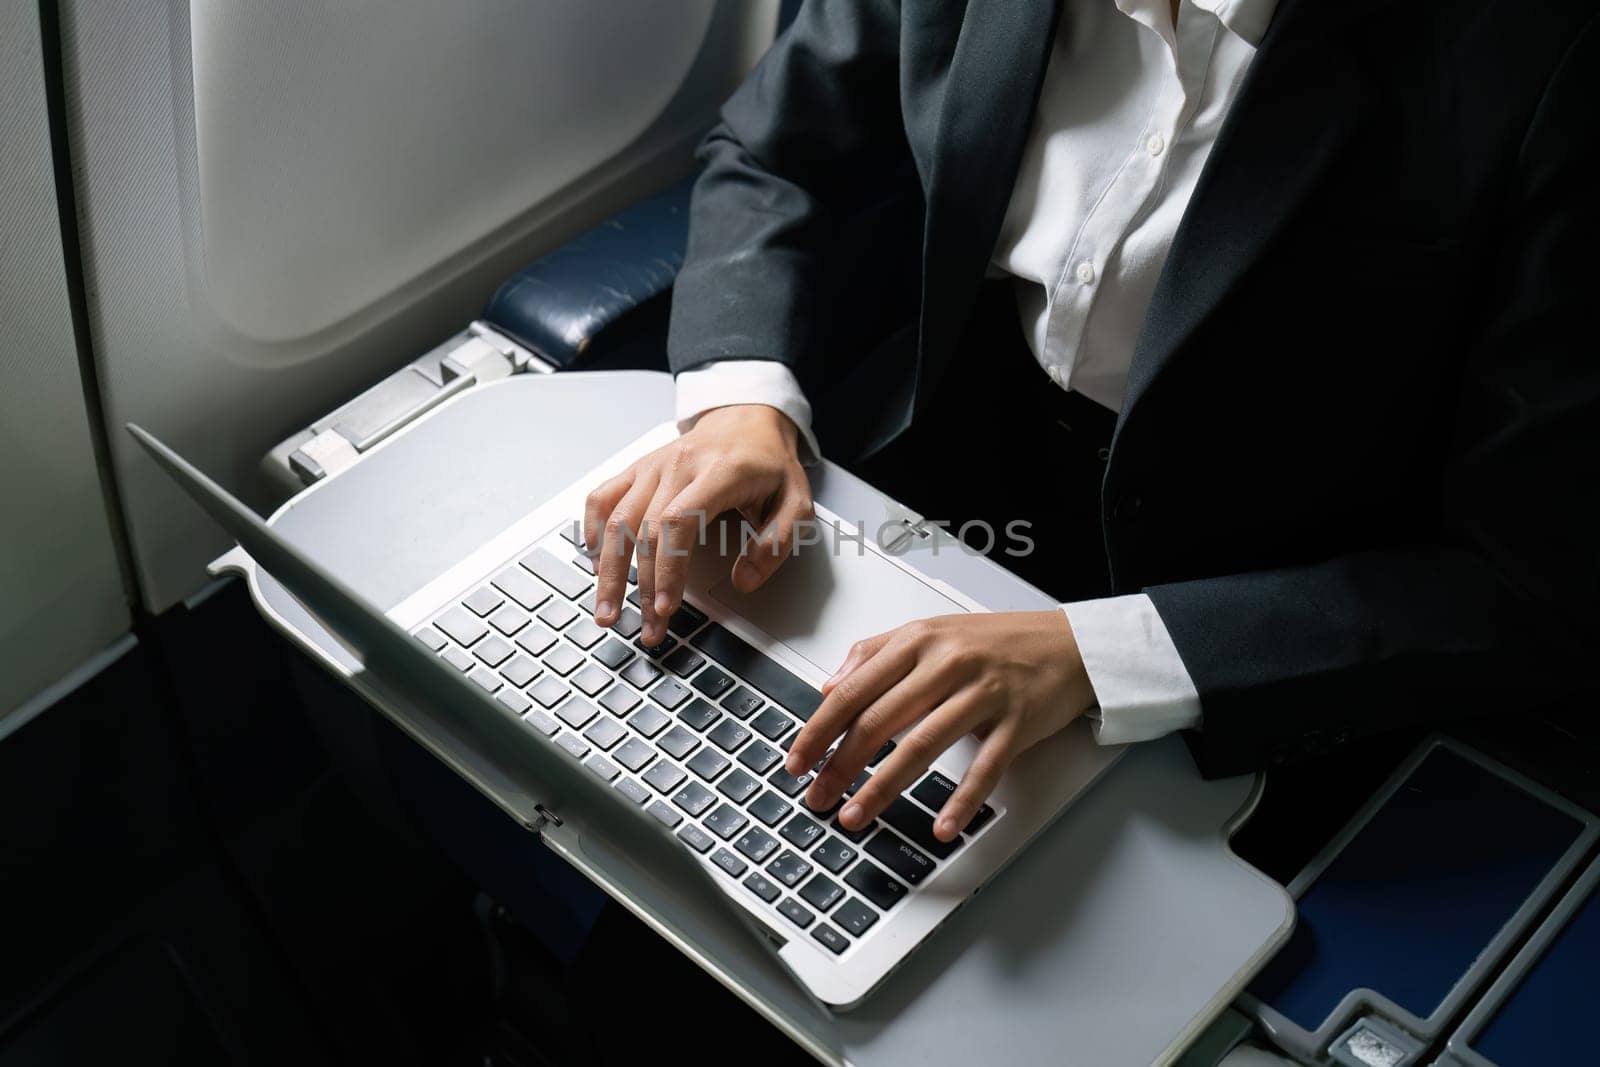 businesswoman flying and working in an airplane in first class, sitting inside an airplane using laptop.